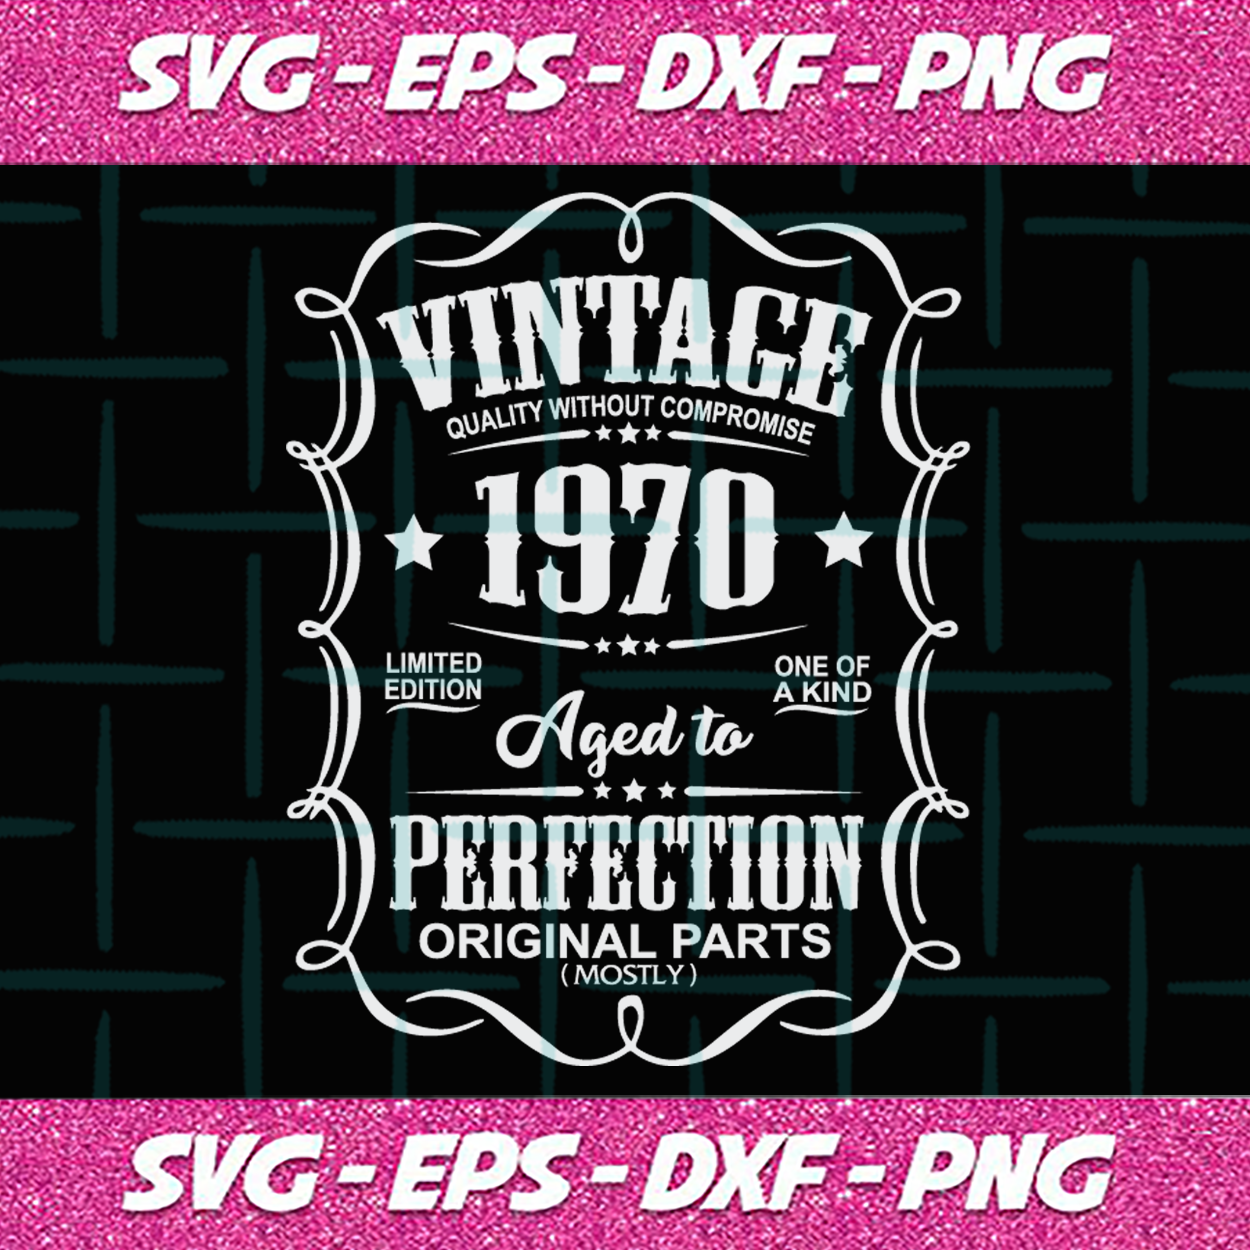 Download Vintage Quality Without Compromise 1970 Aged To Perfection Original Parts Svg Files For Silhouette Files For Cricut Svg Dxf Eps Png Instant Download Trendiessvg Com